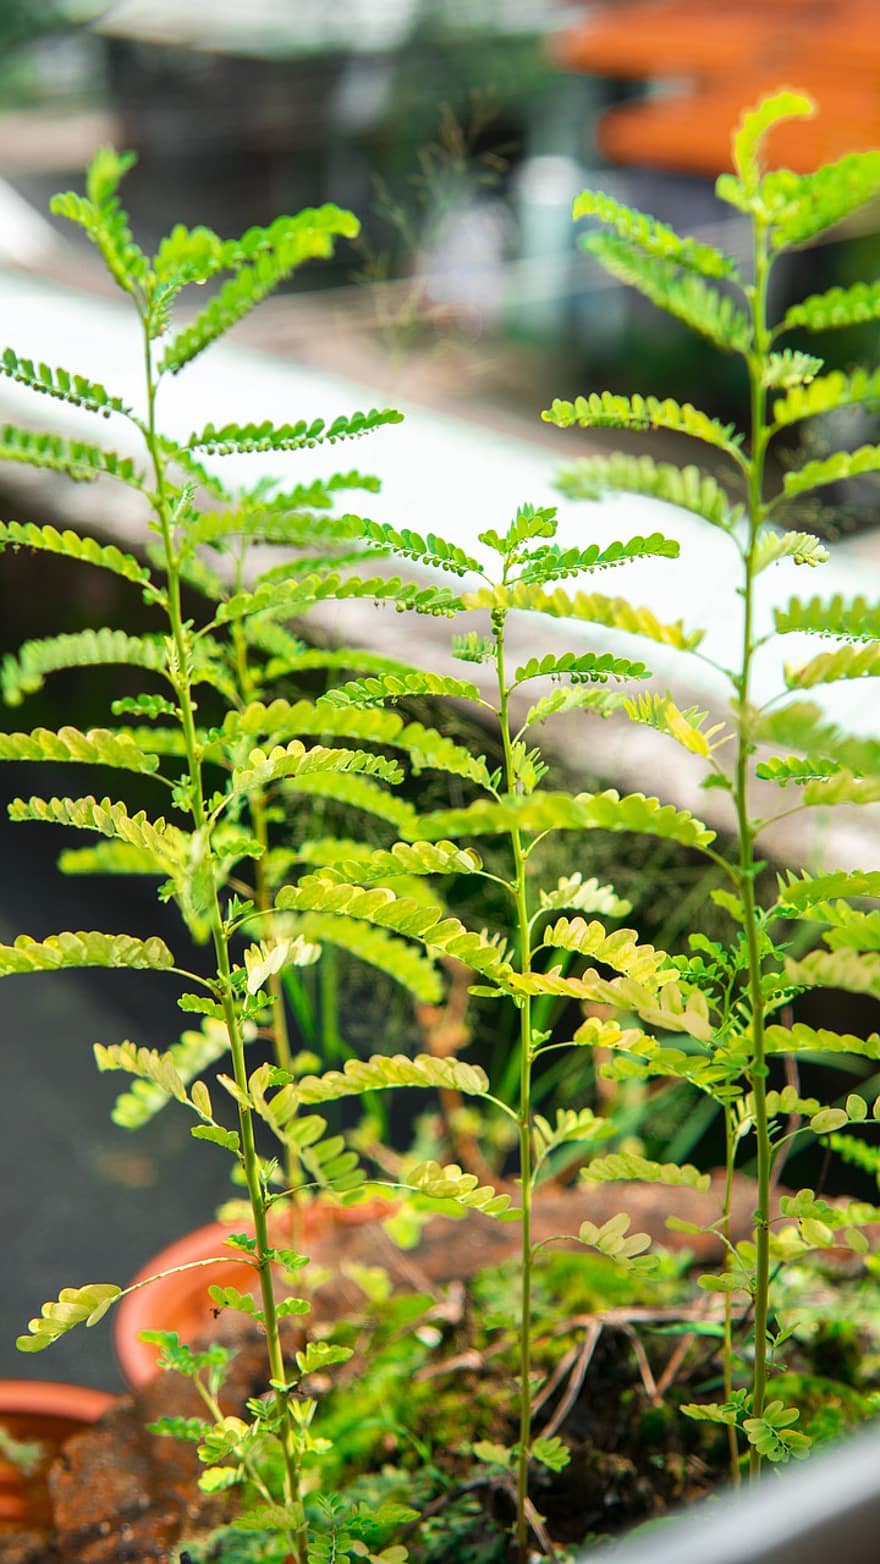 Plant, Leaves, Foliage, Green, Potted Plant, Garden, Nature